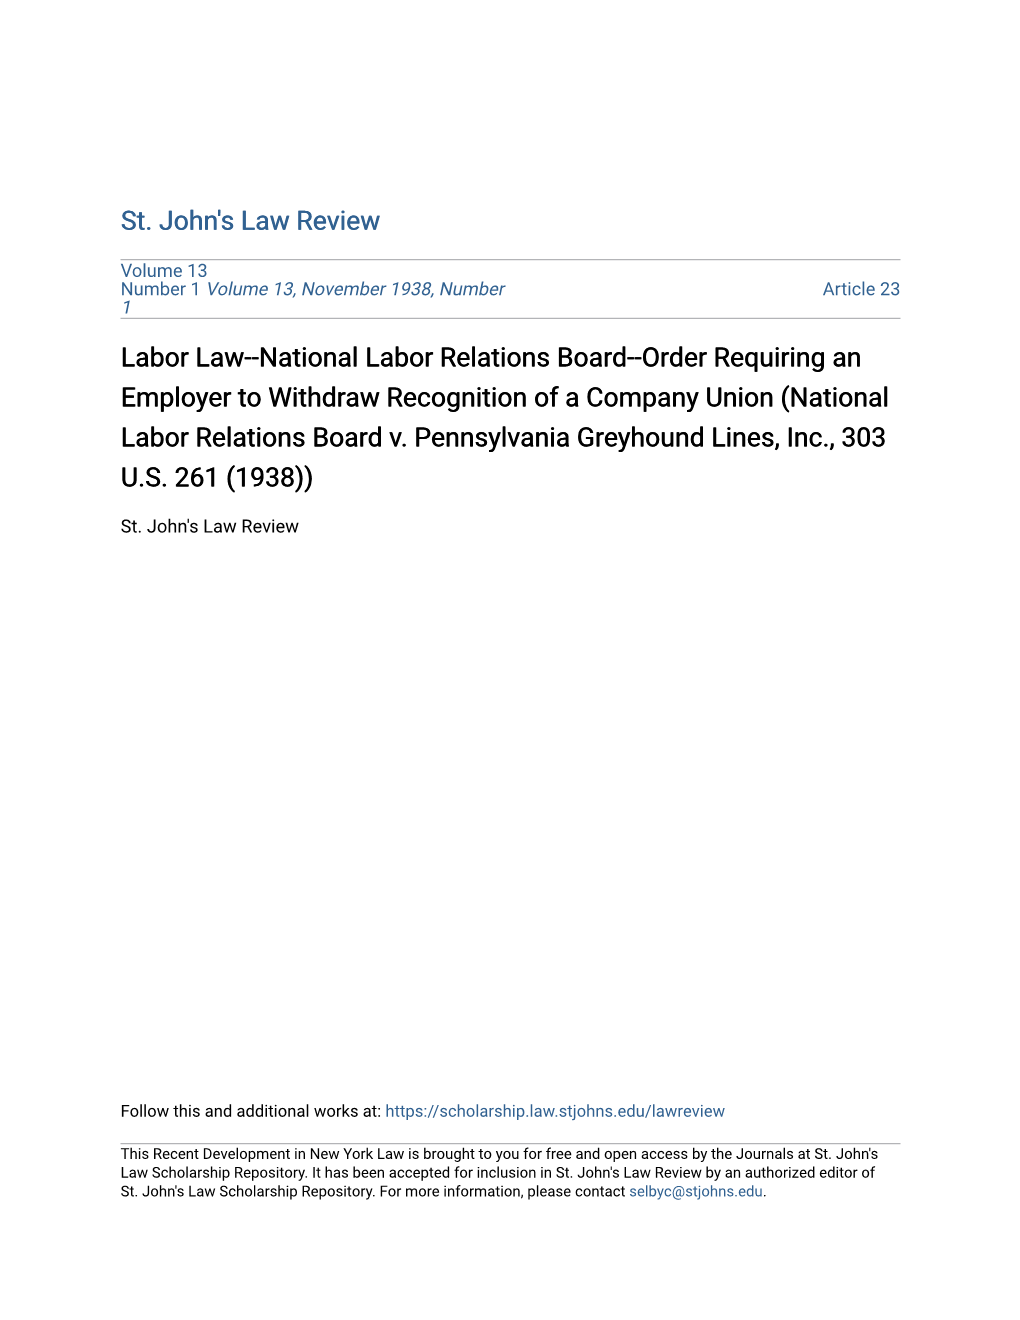 Labor Law--National Labor Relations Board--Order Requiring an Employer to Withdraw Recognition of a Company Union (National Labor Relations Board V